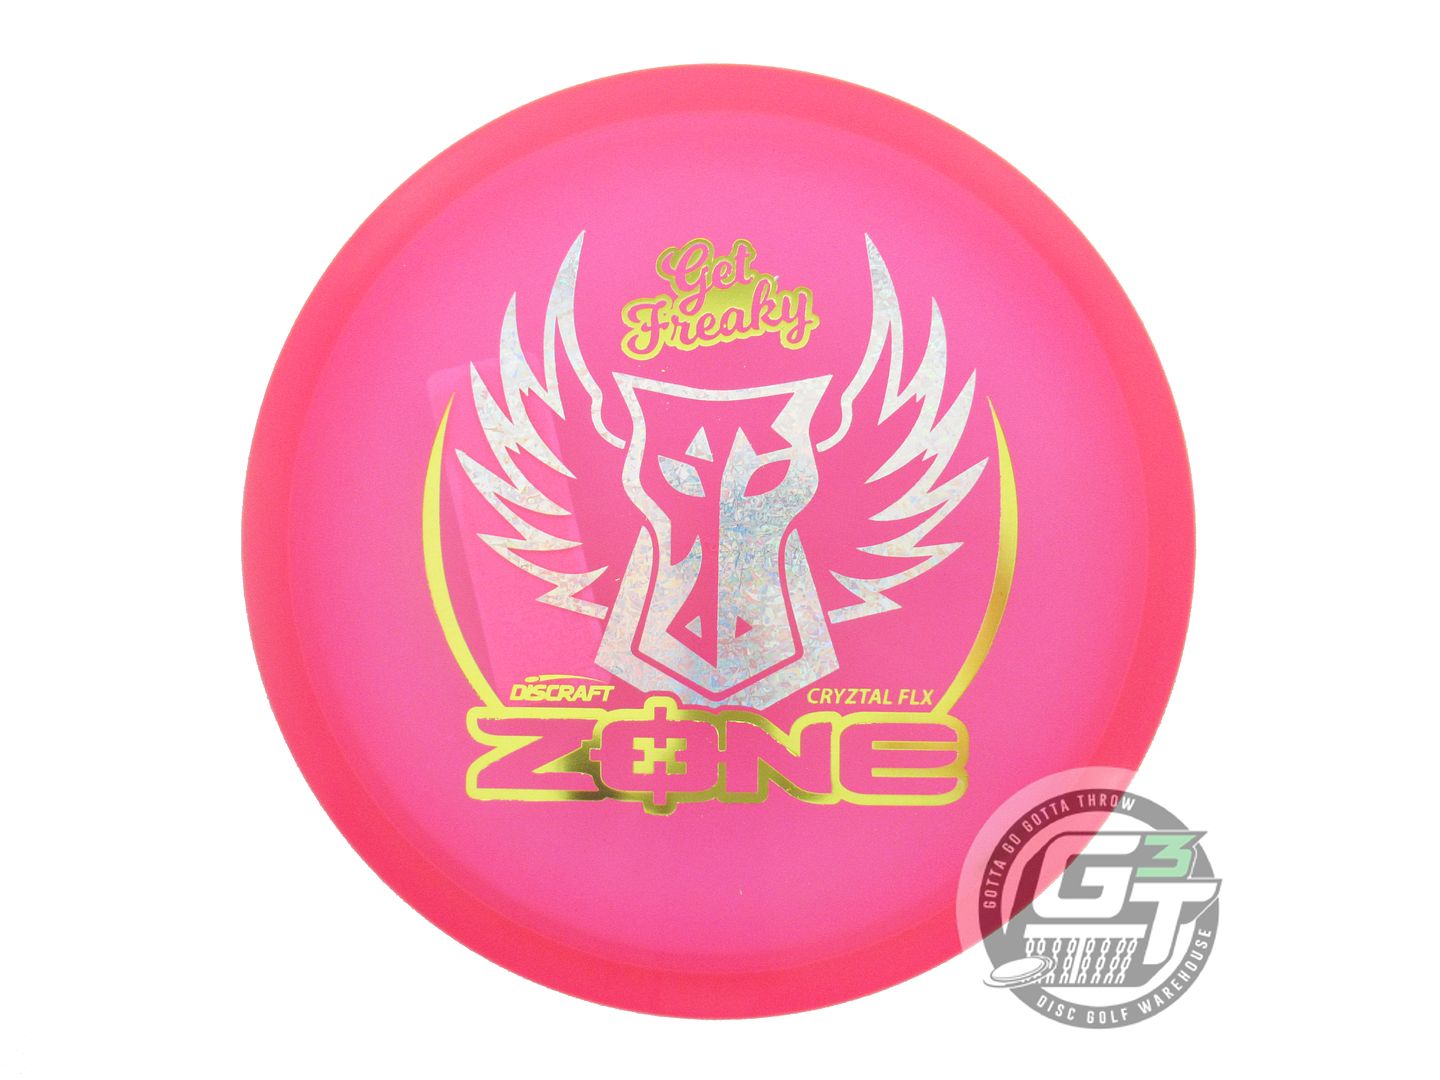 Discraft Limited Edition 2024 Elite Team Brodie Smith CryZtal Z FLX Zone Putter Golf Disc (Individually Listed)